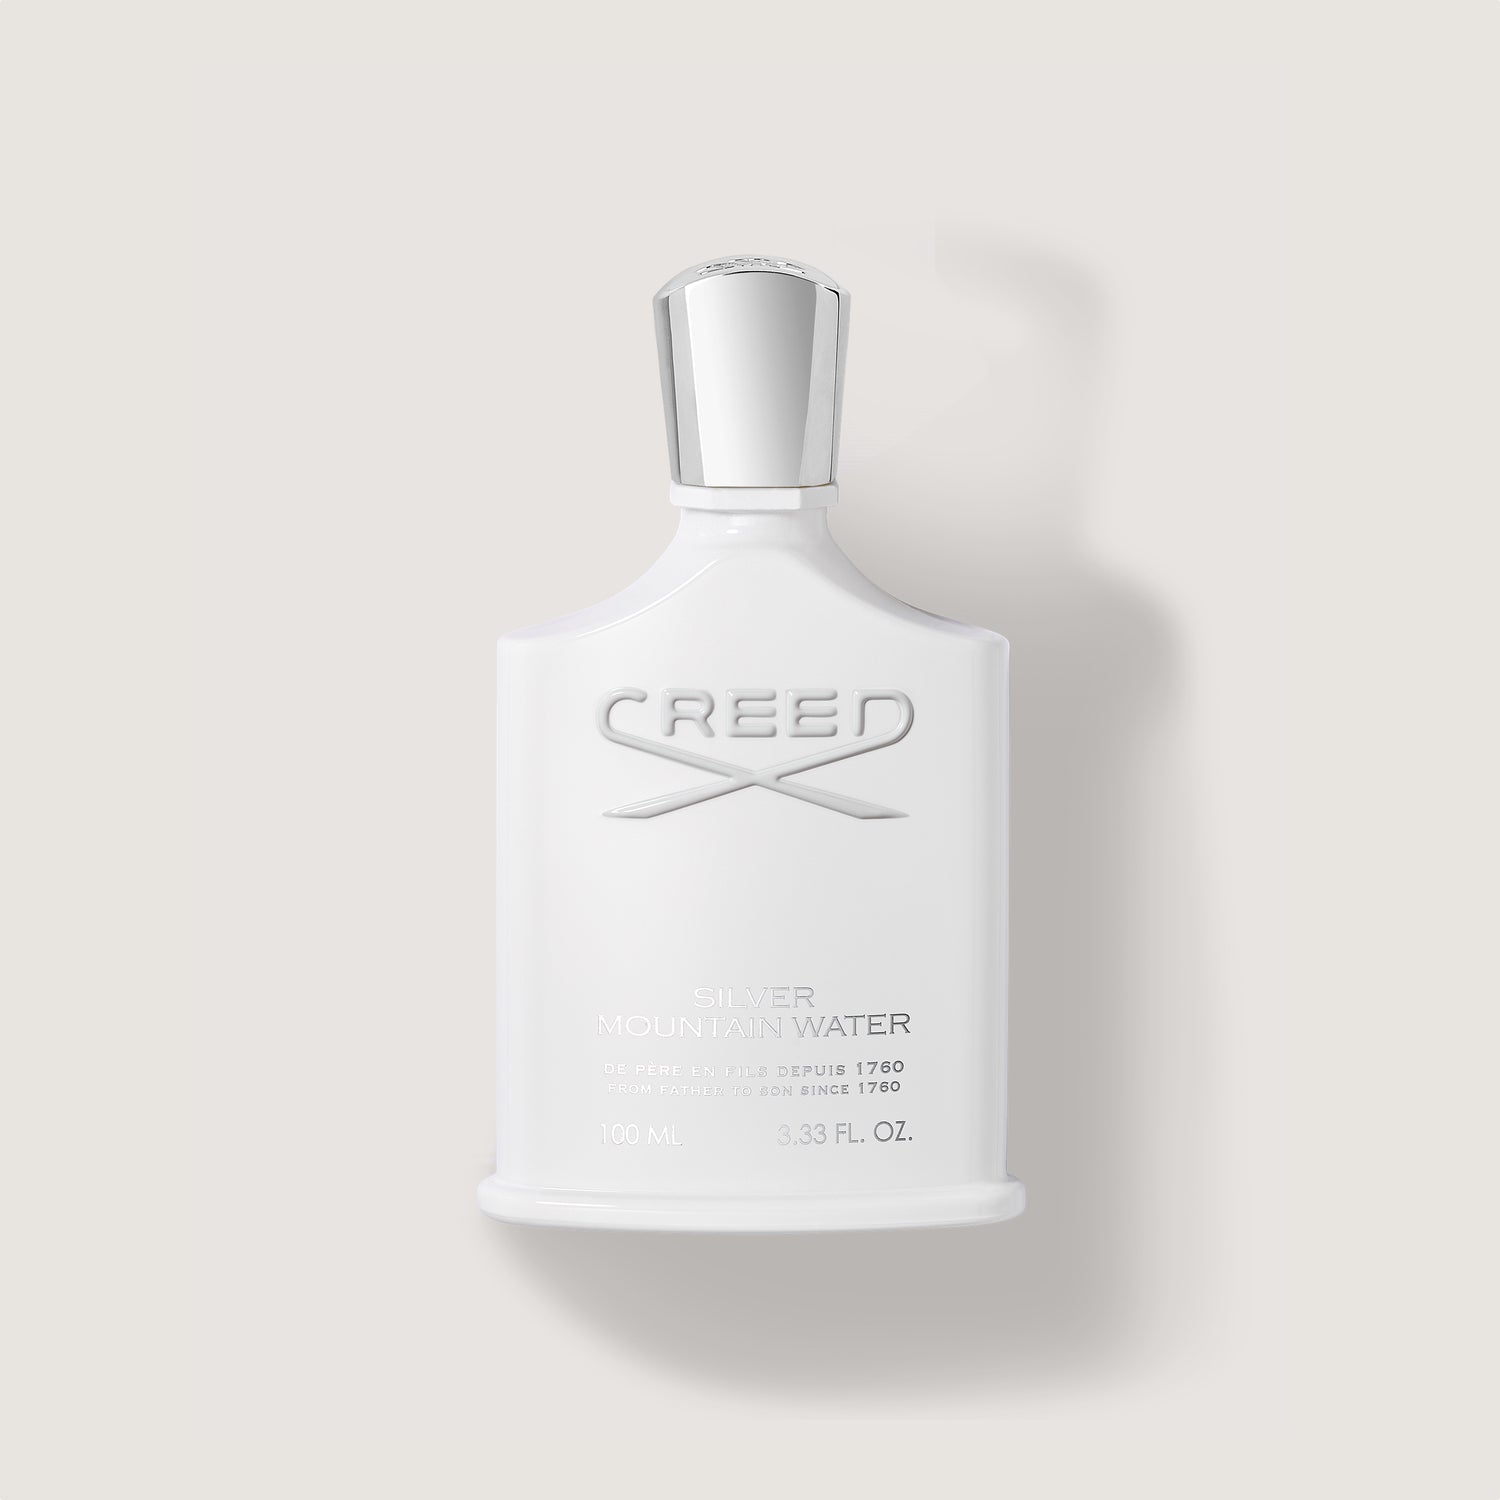 Creed Aventus Cologne By Creed 3.3 oz / 100 ml EDP Spray Tester No Cap  3508441001299